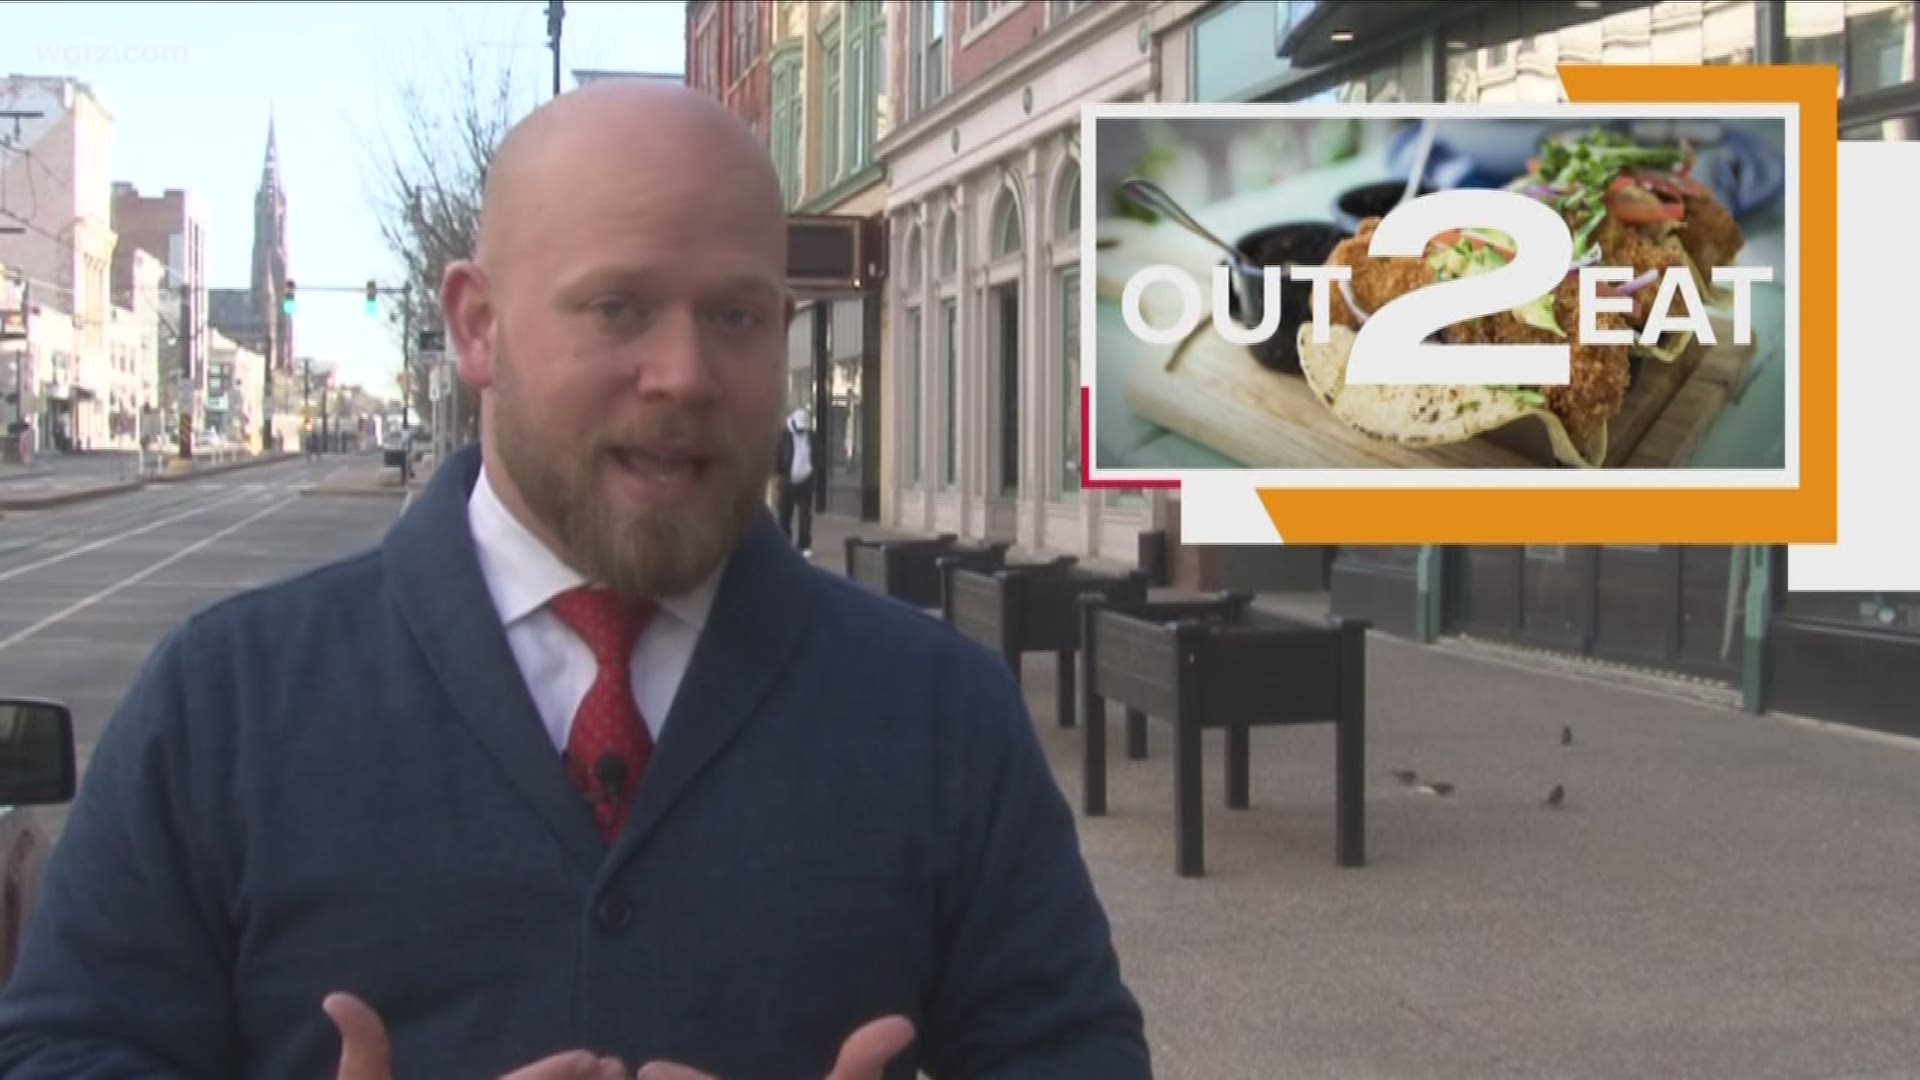 This week in Out 2 Eat, reporter and former chef Joshua Robinson is showing off a few new food and drink spots around Western New York